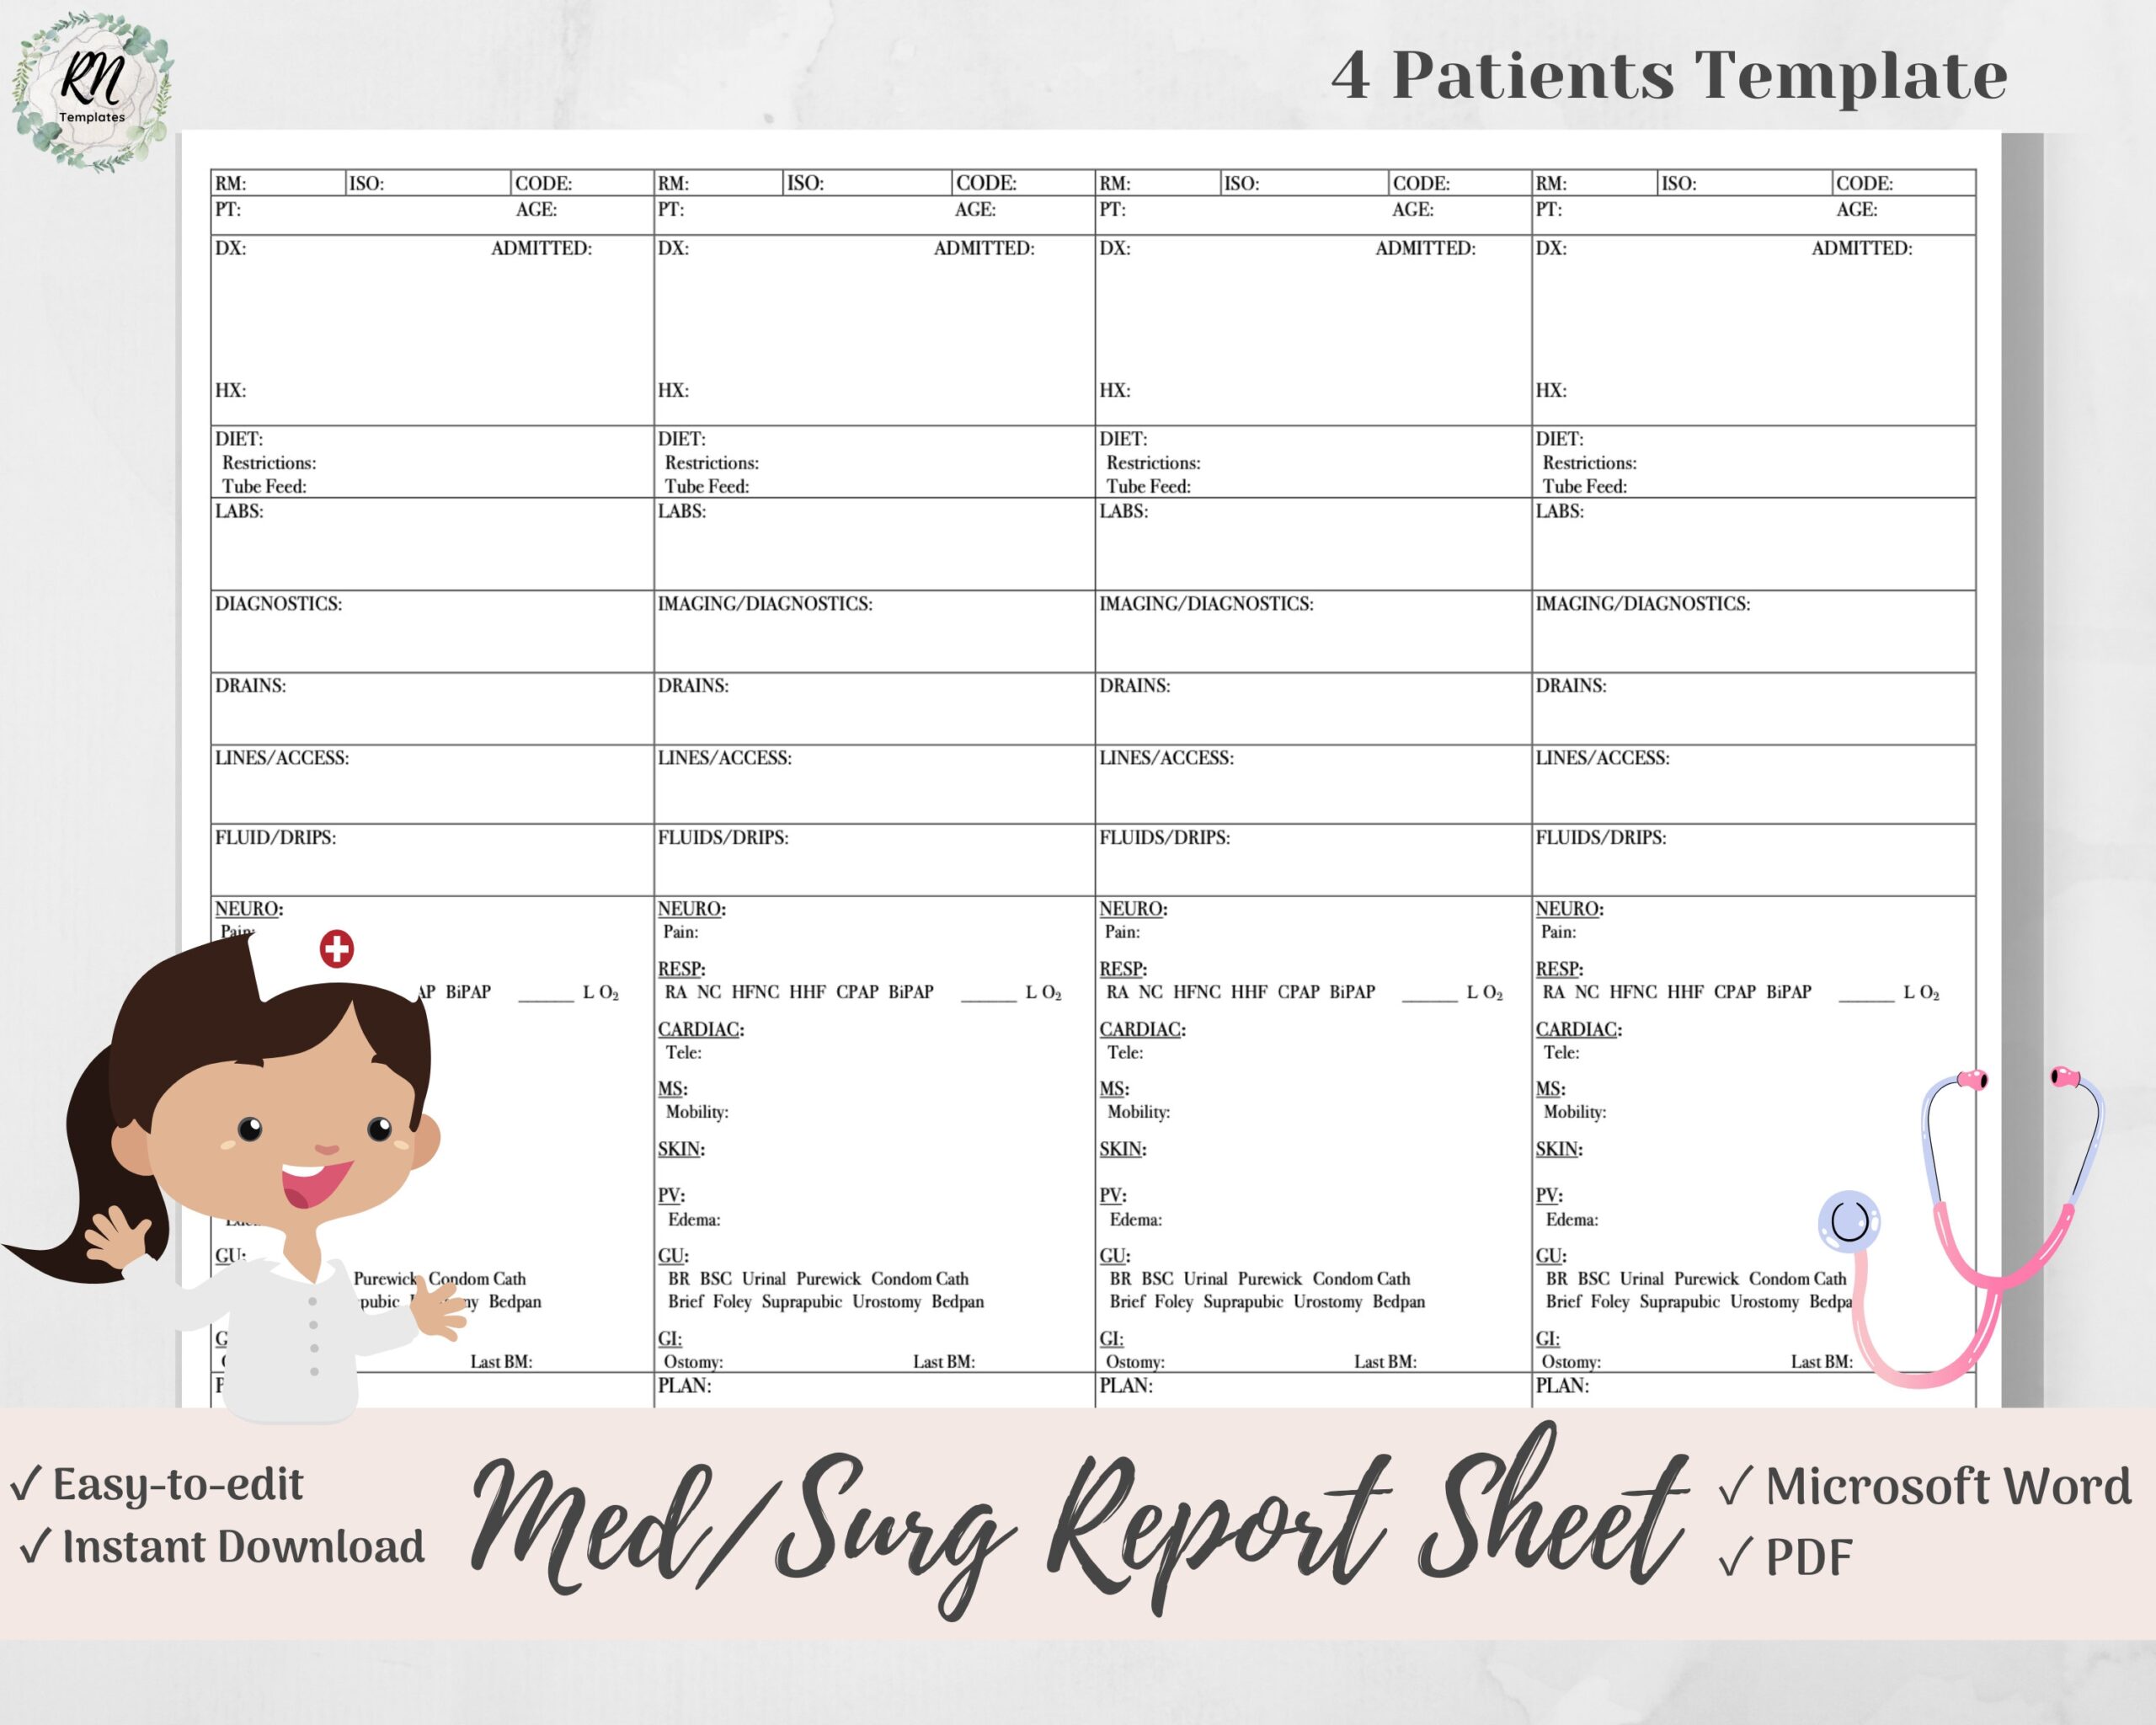 The BEST Med surg Nurse Brain Report Sheet For 4 Patients Microsoft Word PDF Etsy